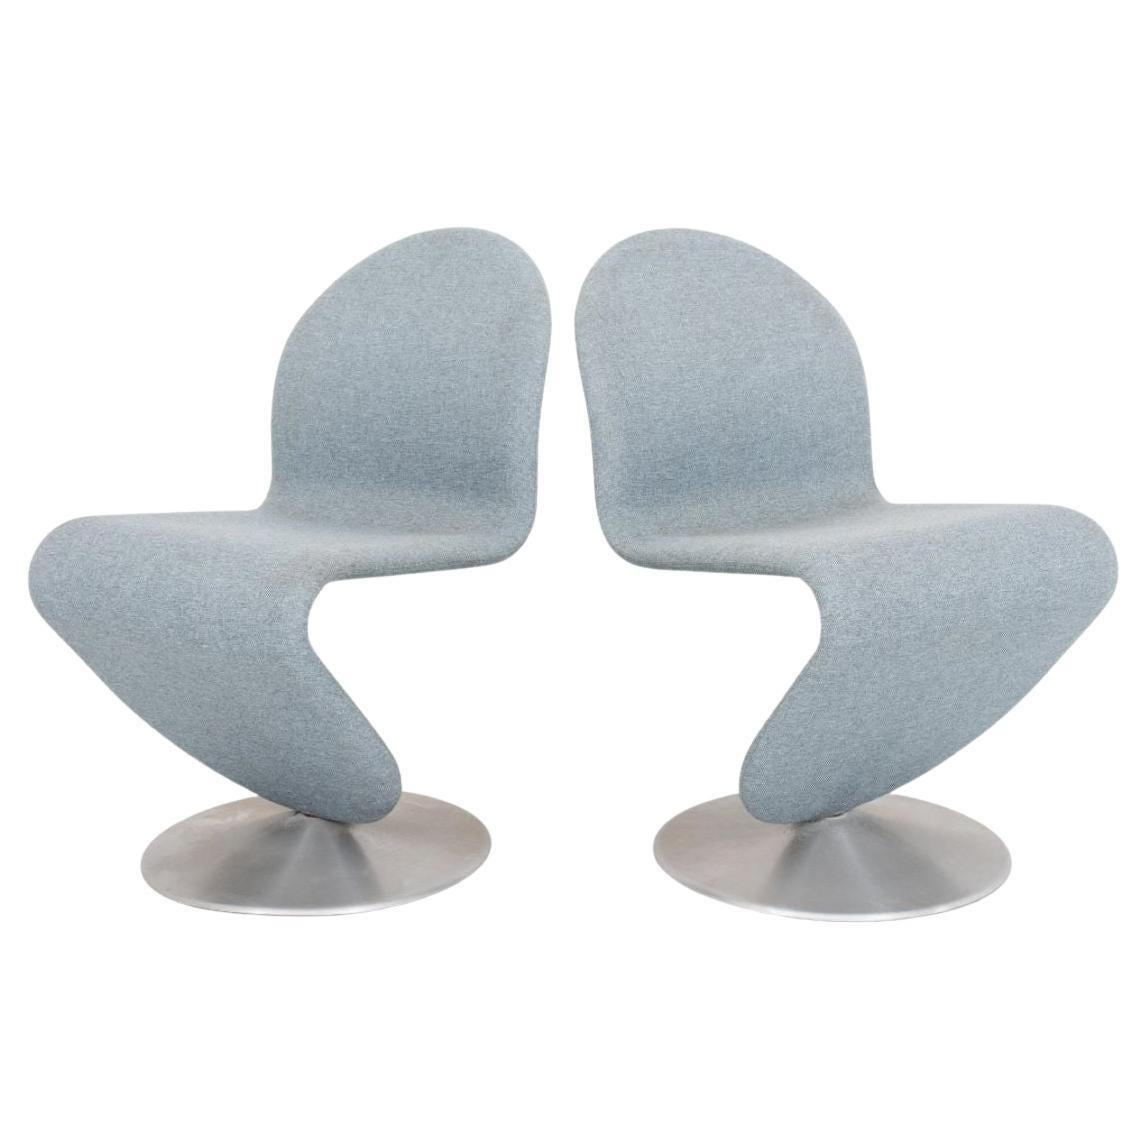 Verner Panton Chair a / System 123 Dining Chairs, 2